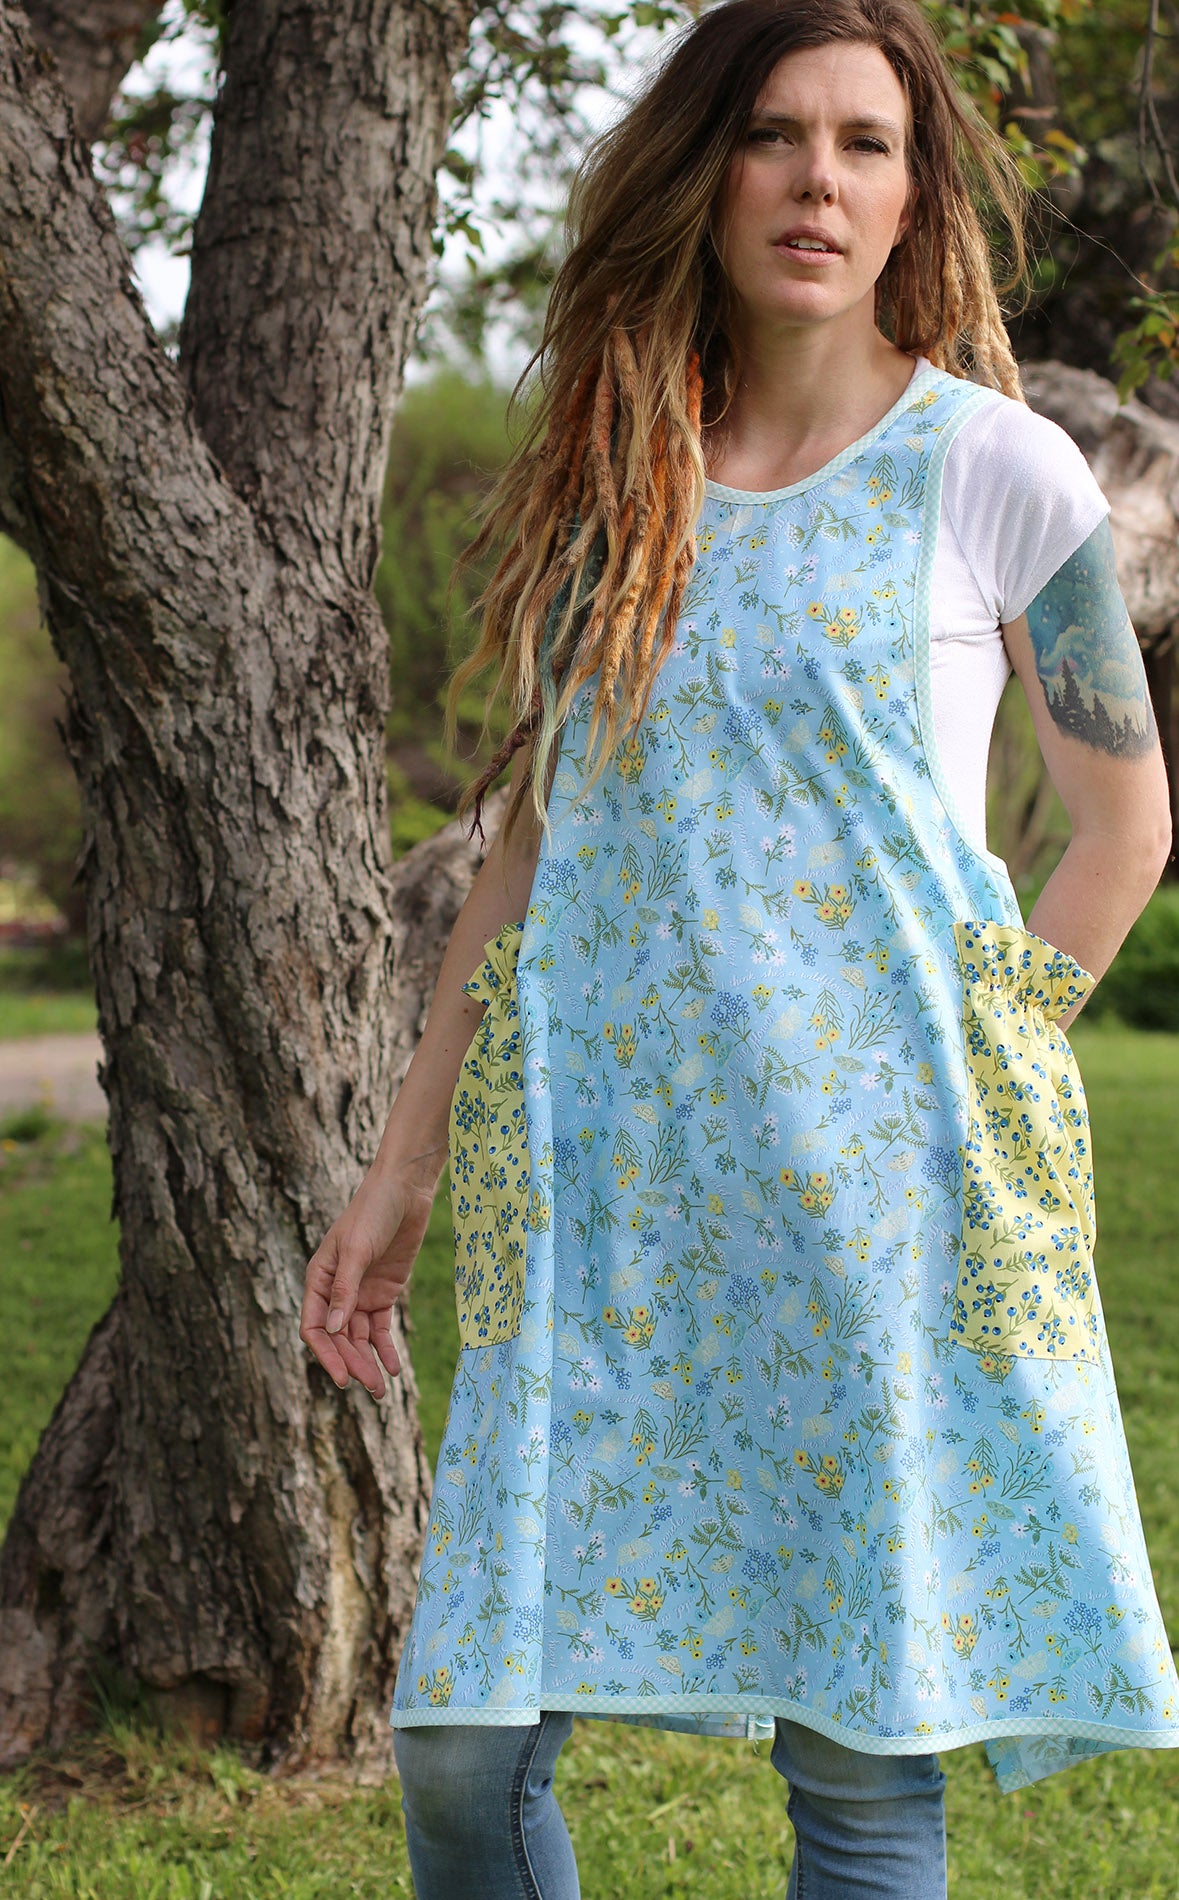 No Tie Apron in Blue Floral with Yellow Pockets - Front View with Model looking into the camera.